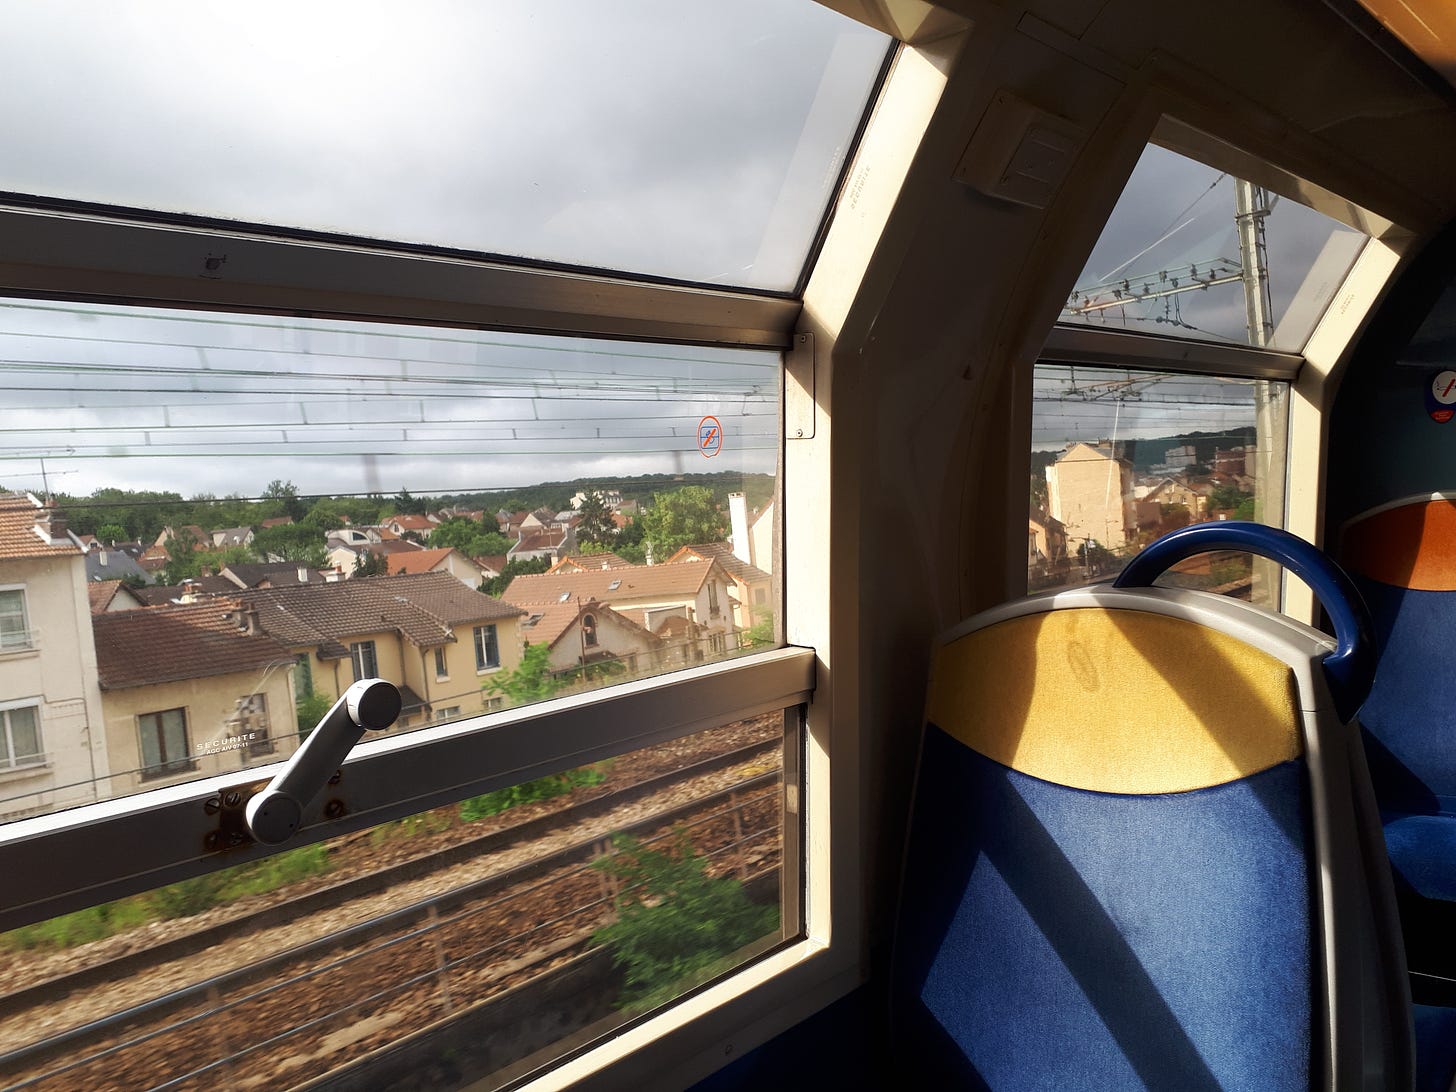 View from inside of a train car, overlooking Paris suburbs.